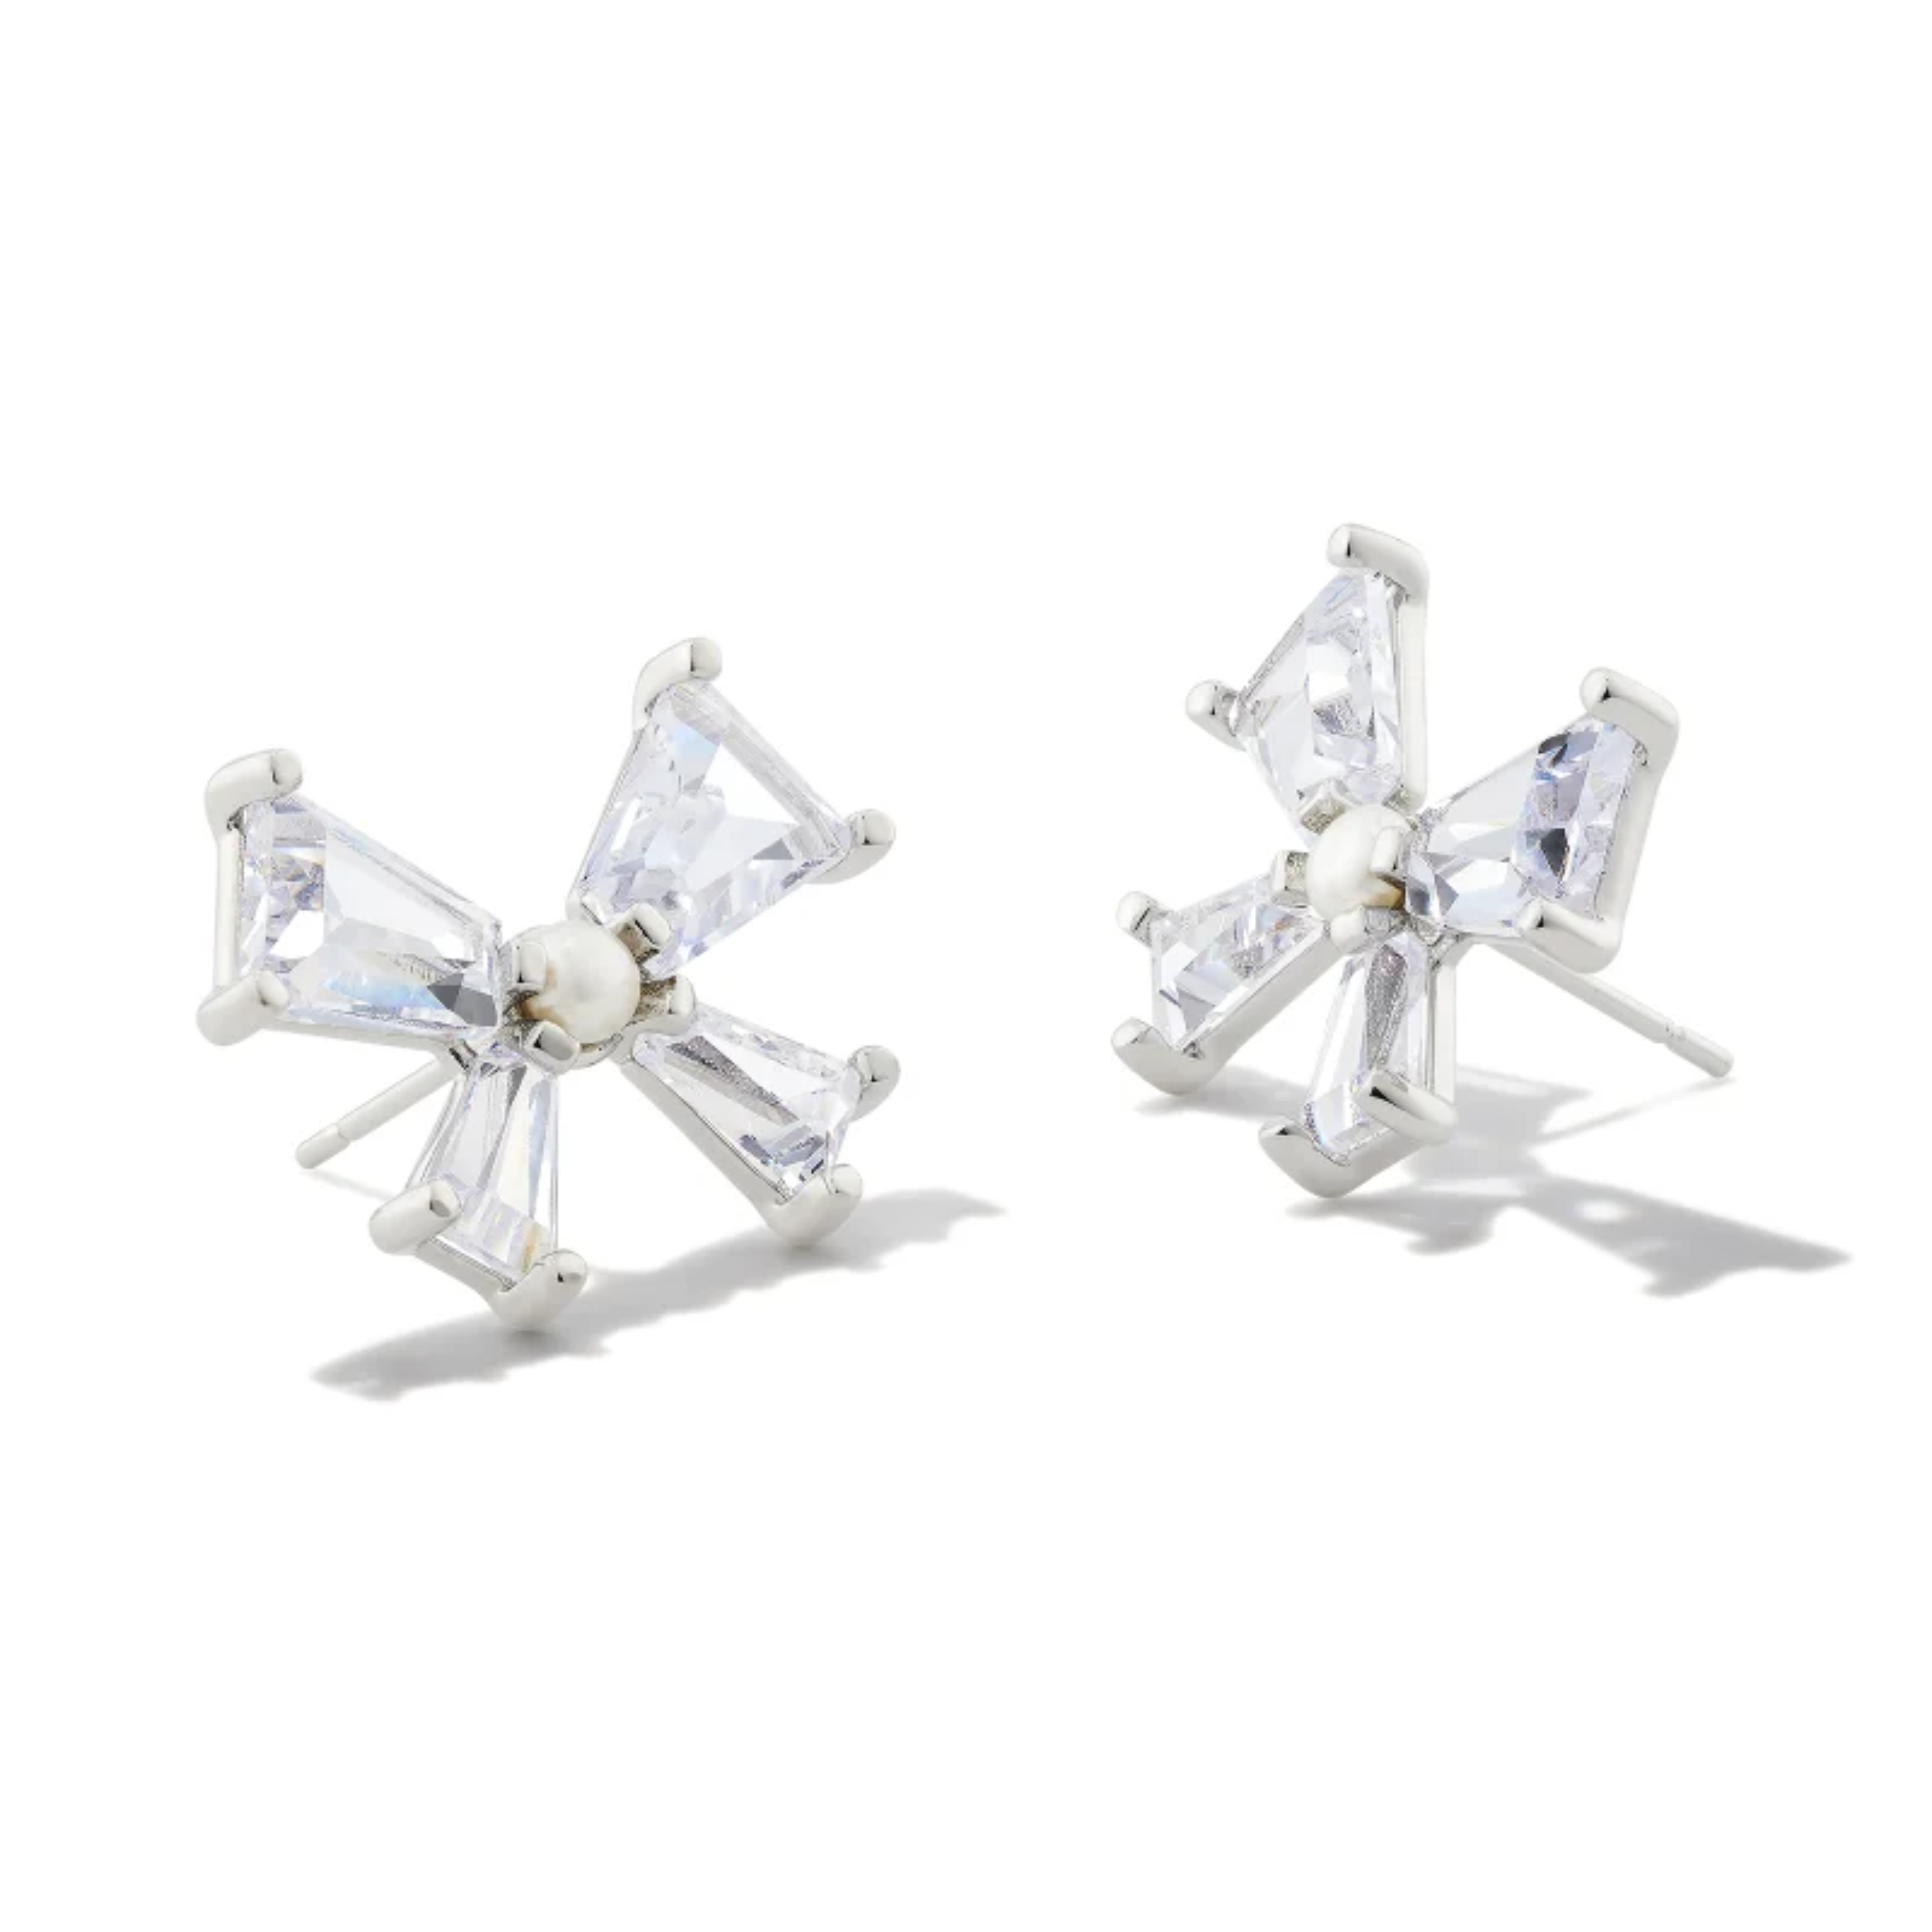 These Blair Silver Bow Stud Earrings in white by Kendra Scott are pictured on a white background.